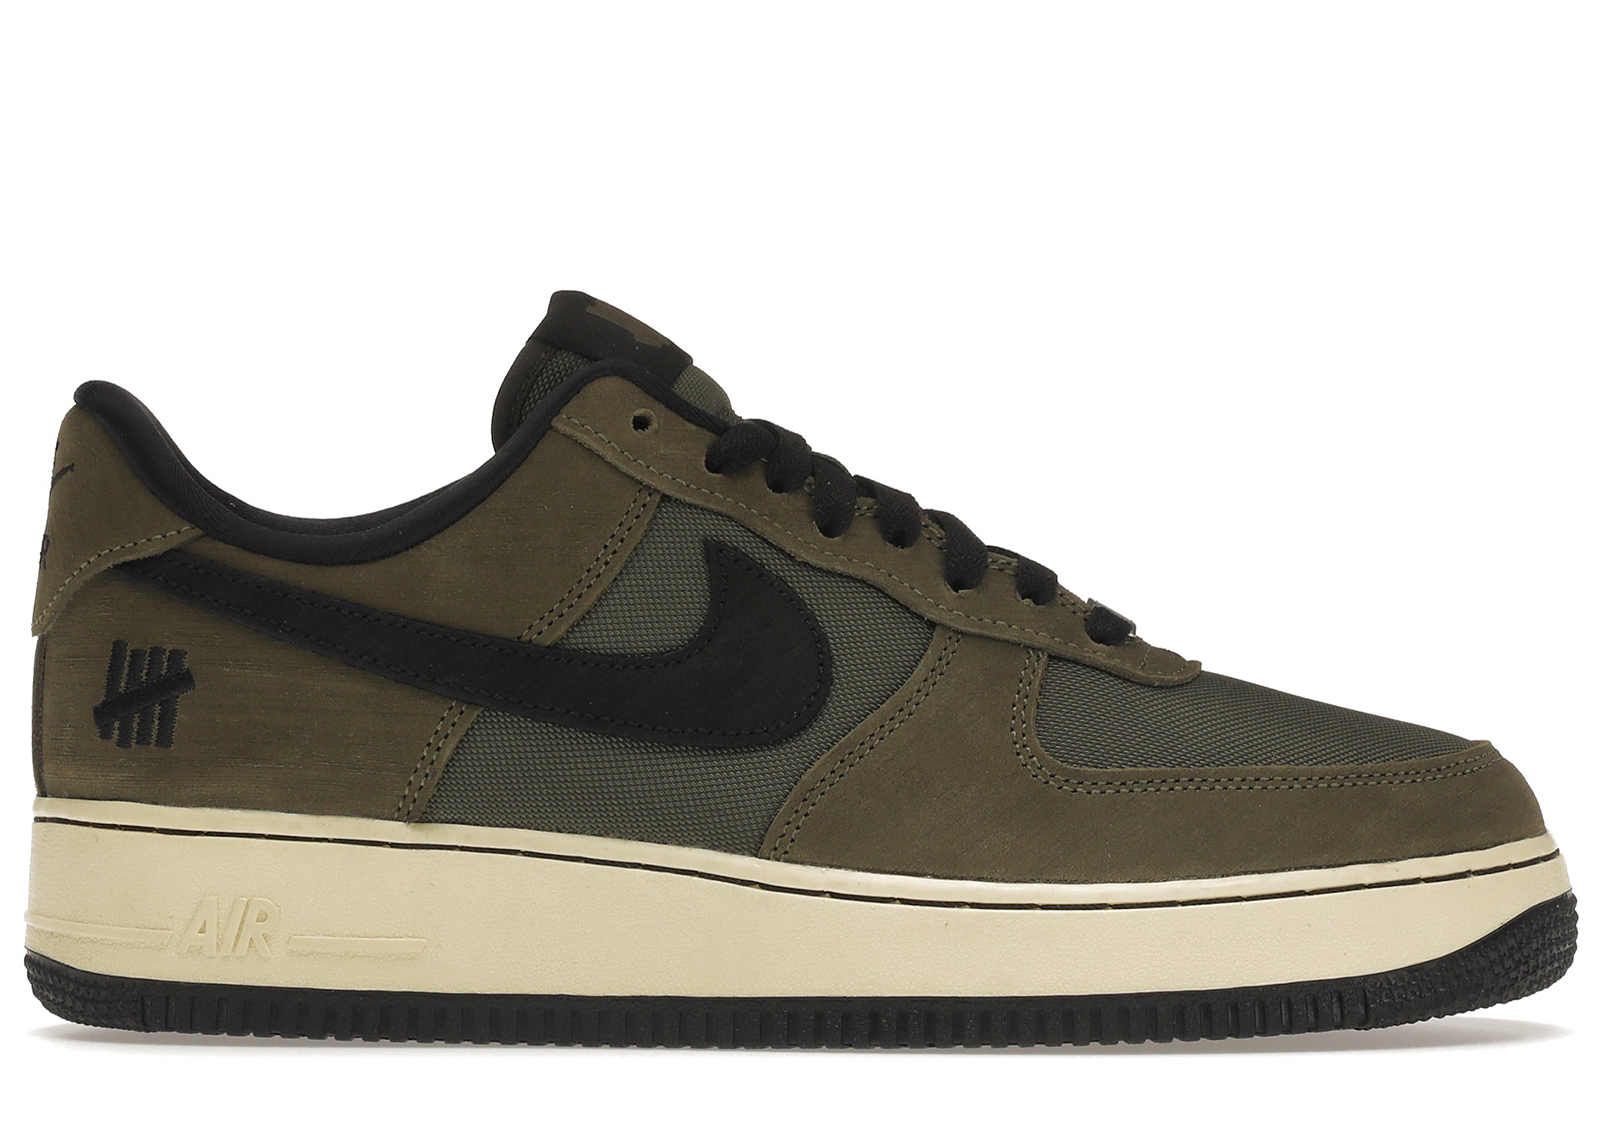 UNDEFEATED × NIKE AIR FORCE 1 LOW OLIVE スニーカー 靴 メンズ 超歓迎